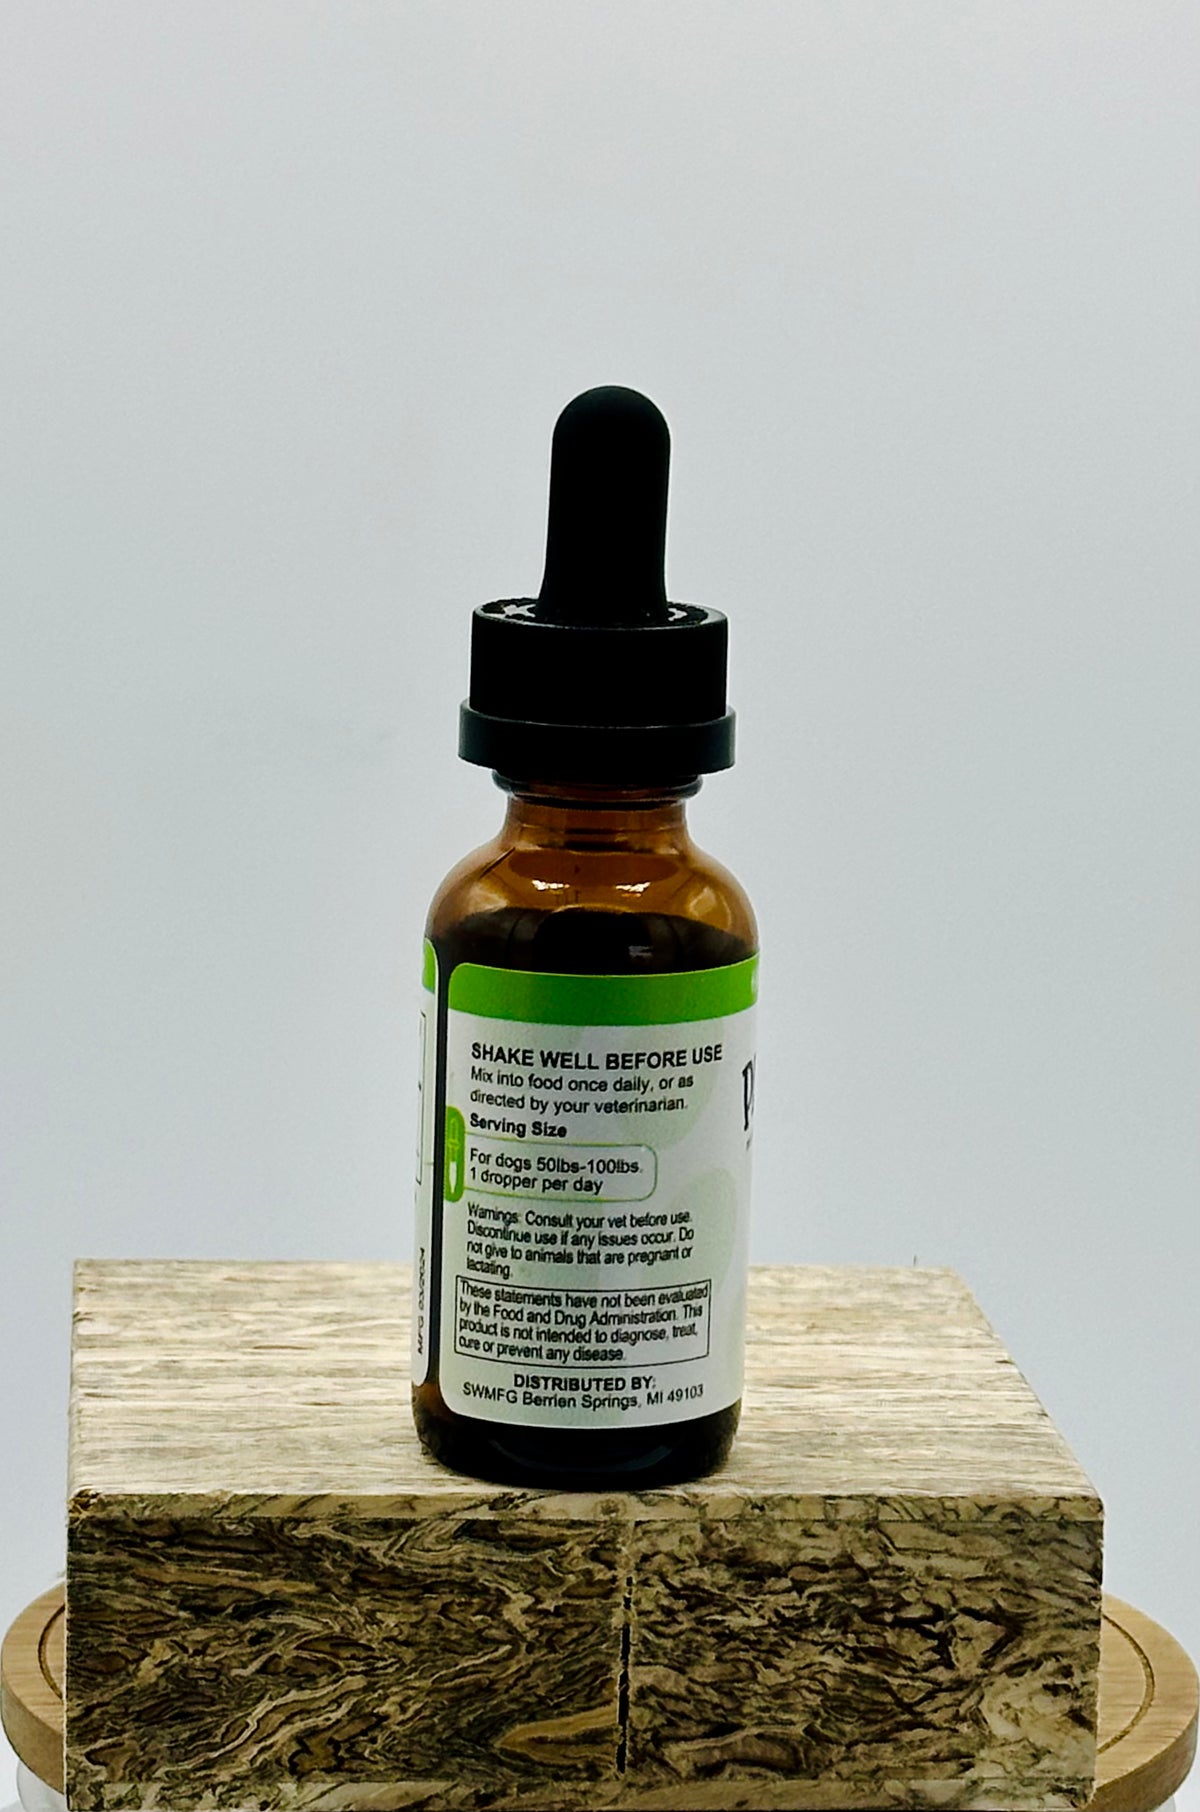 500mg CBD Oil for Large dogs (51-75lbs)